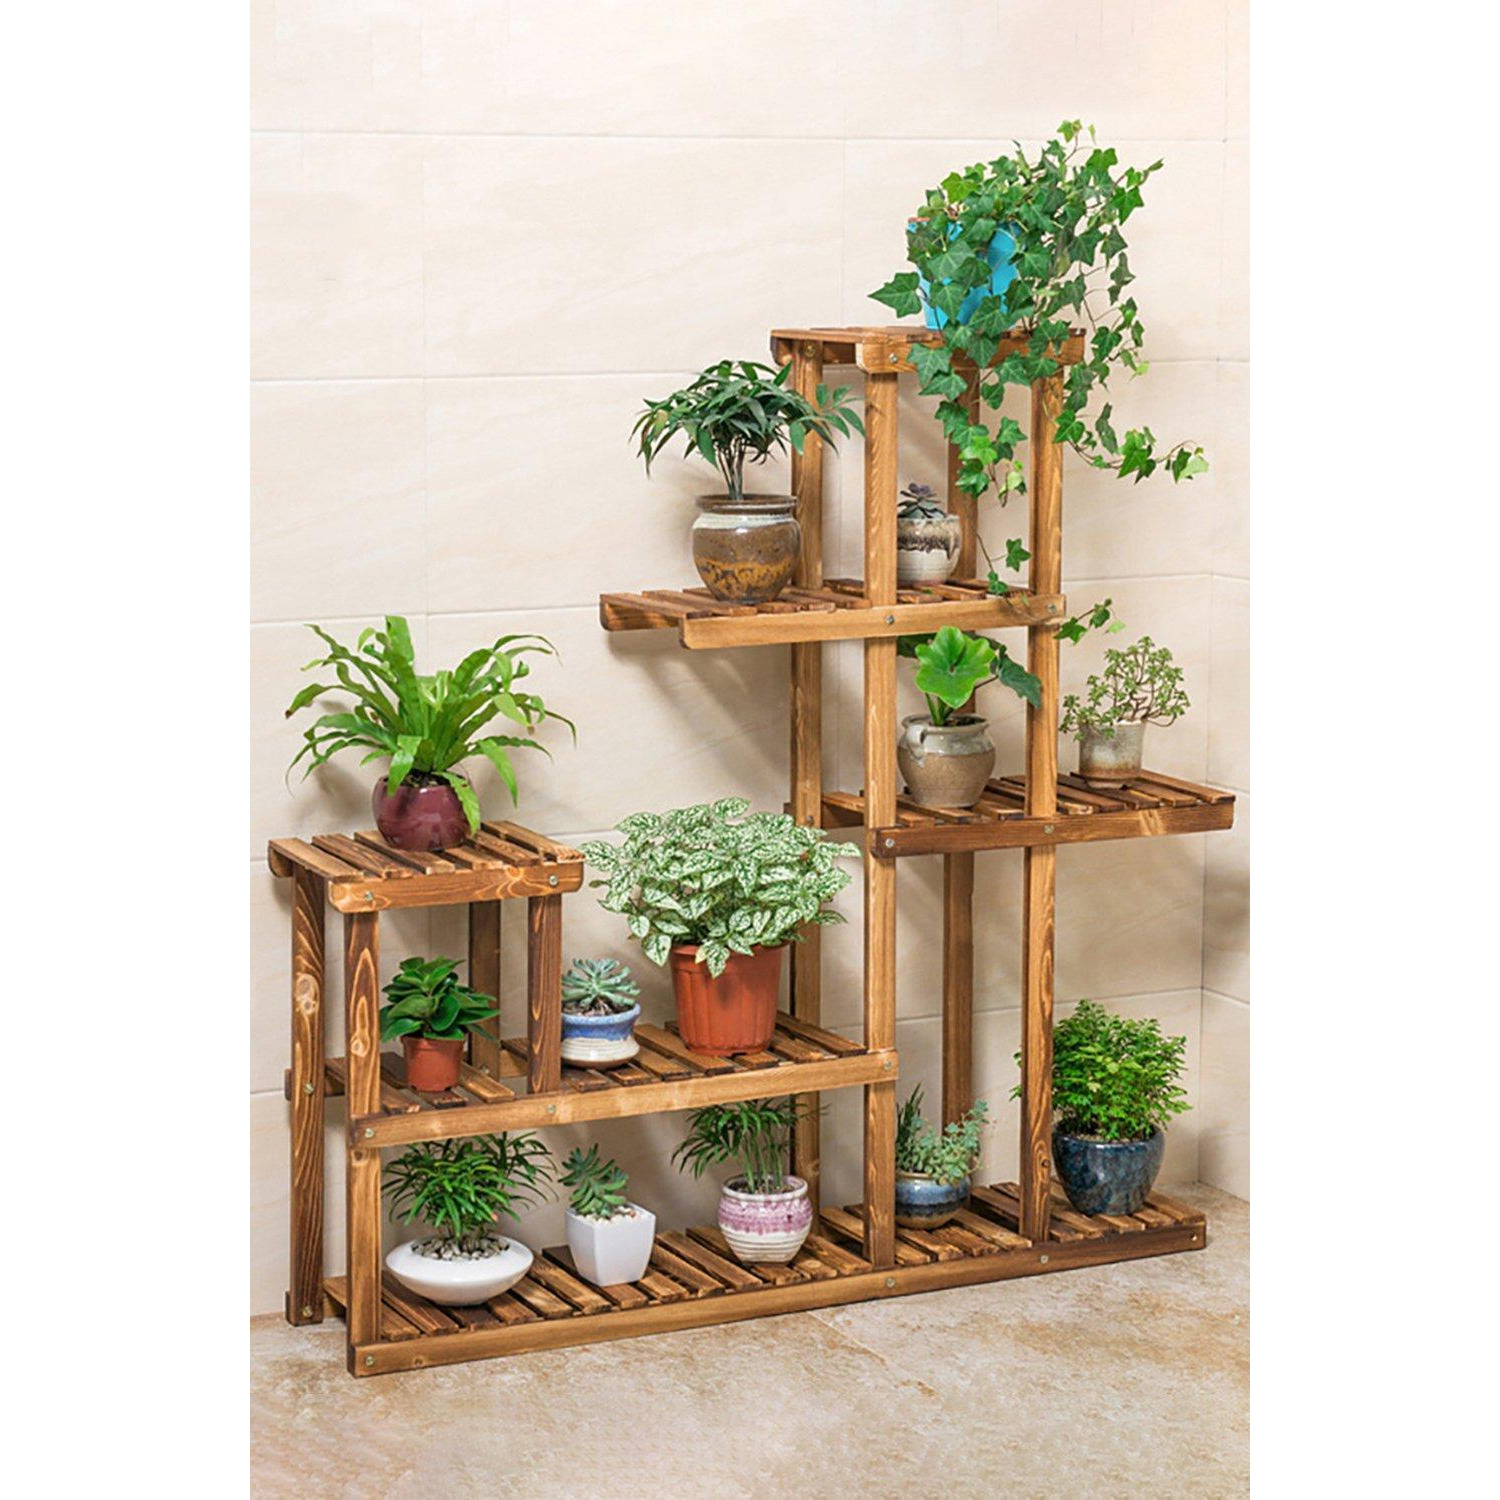 Rustic Large Multi-Tiered Wooden Plant Stand - image 1